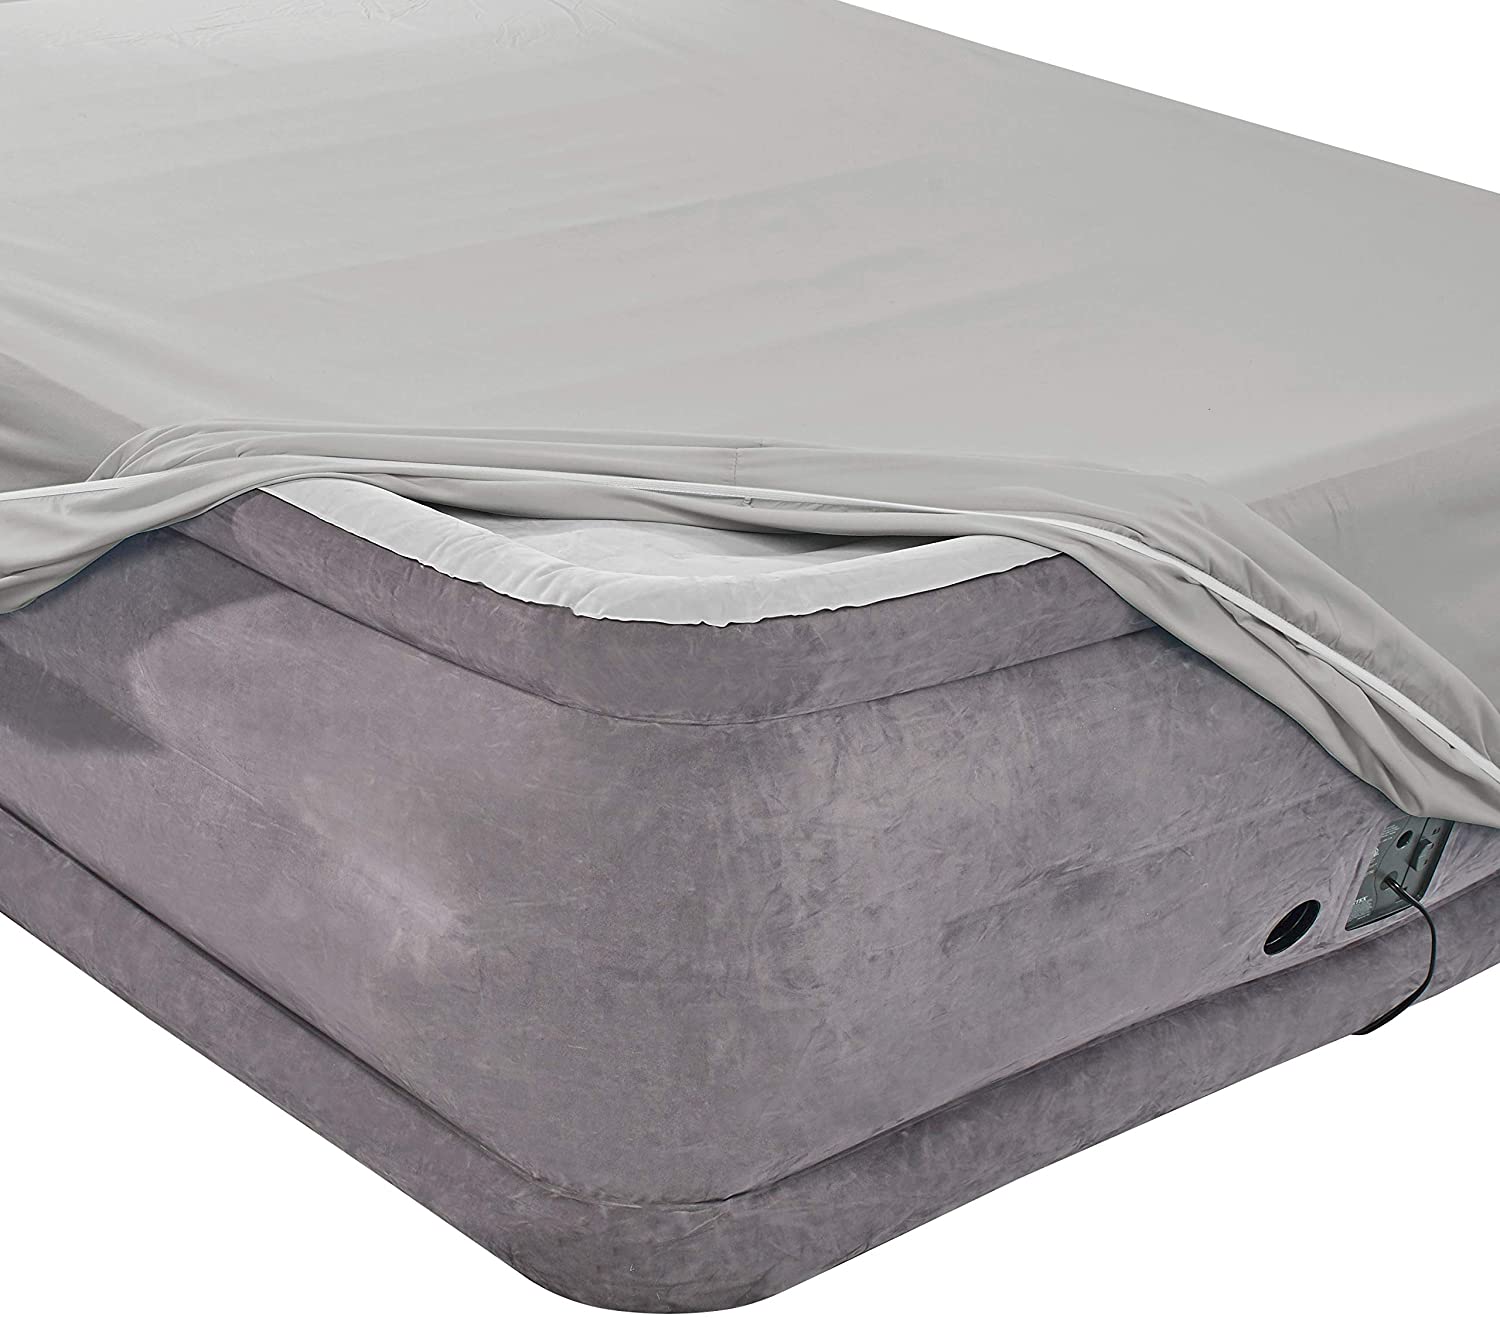 Top 10 Best Air Mattress Sheets Review And Buying Guide